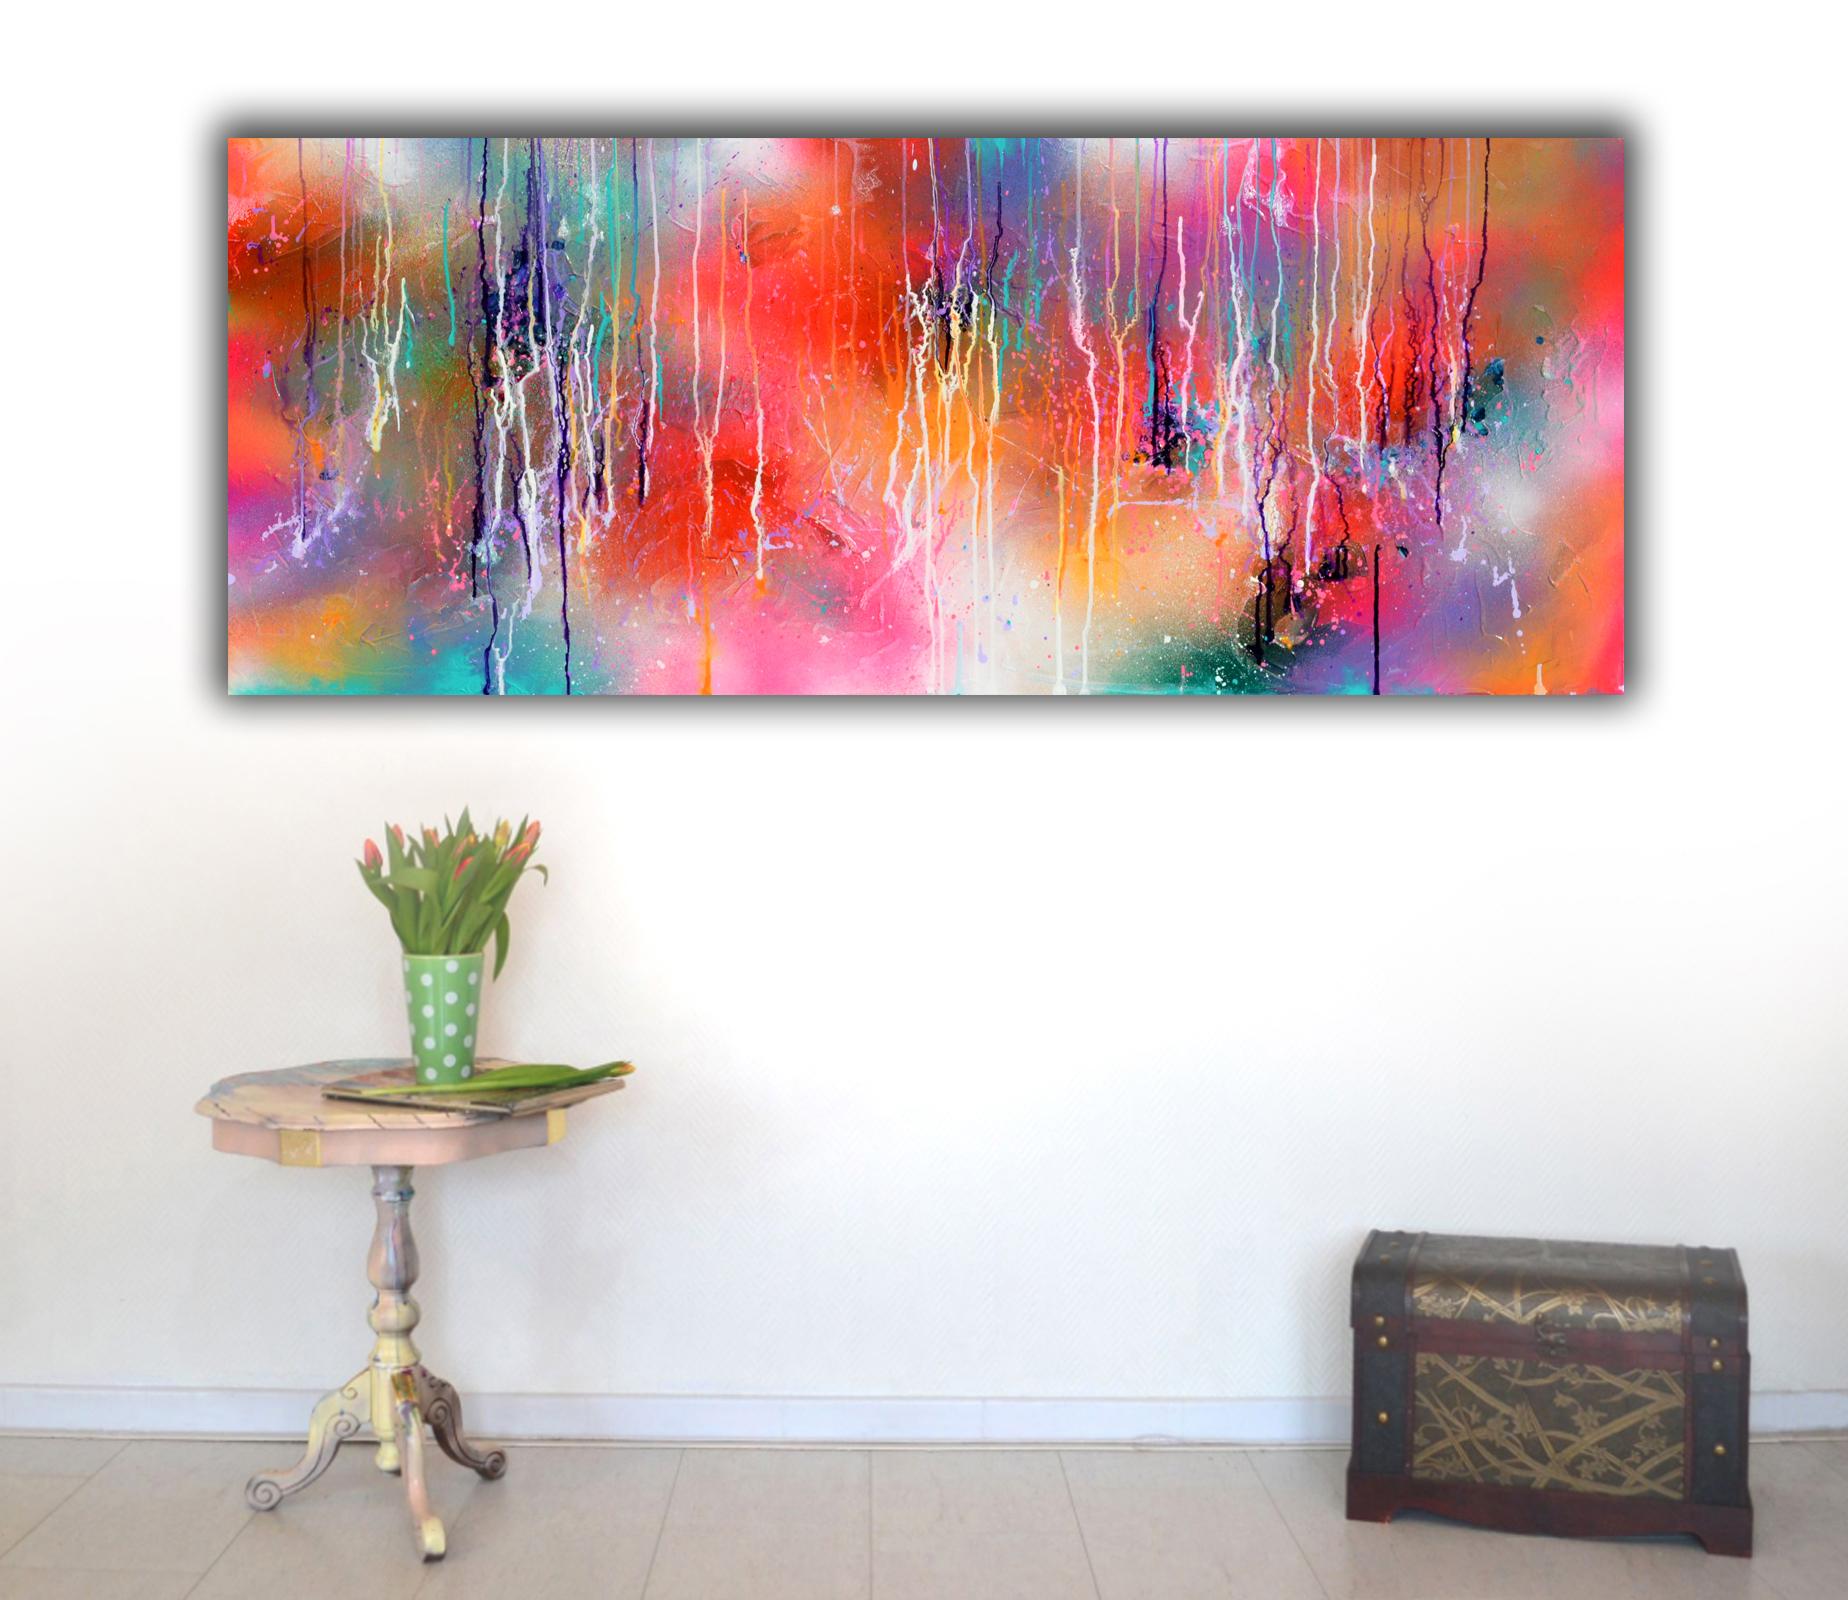 Ready to hang with the edges painted

A beautiful modern abstract, 100% handmade painting, made with professional varnished acrylics and Amsterdam acrylic sprays on stretched heavy canvas.

Dimensions: 150X60X2 cm, 59x23.6x0.8 inches

It is signed